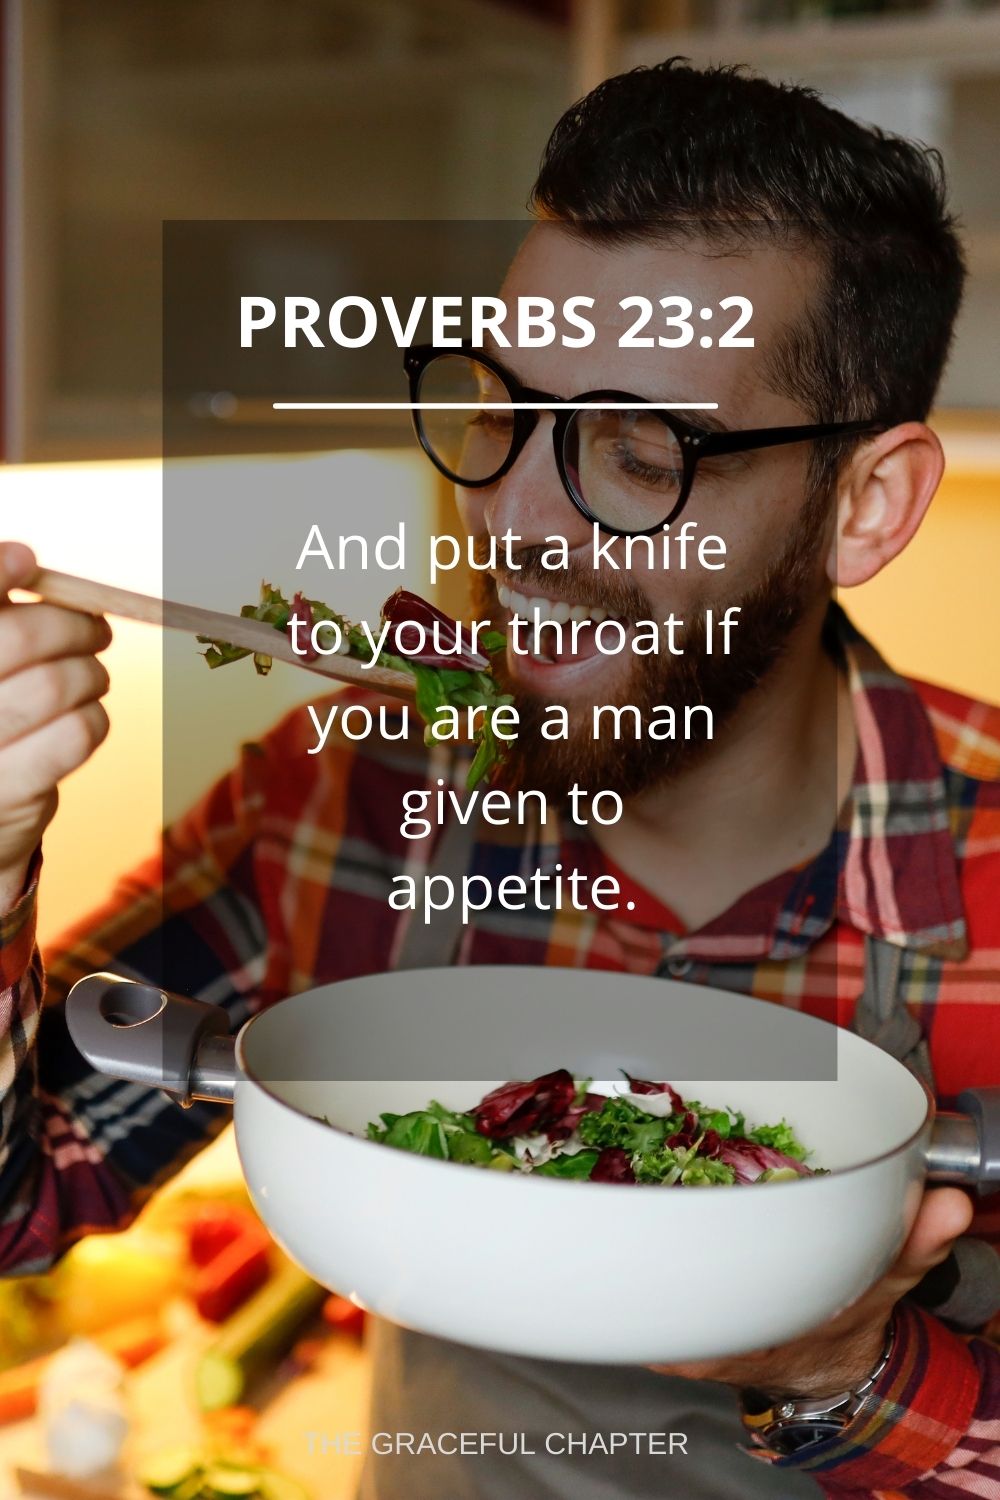 And put a knife to your throat If you are a man given to appetite. Proverbs 23:2